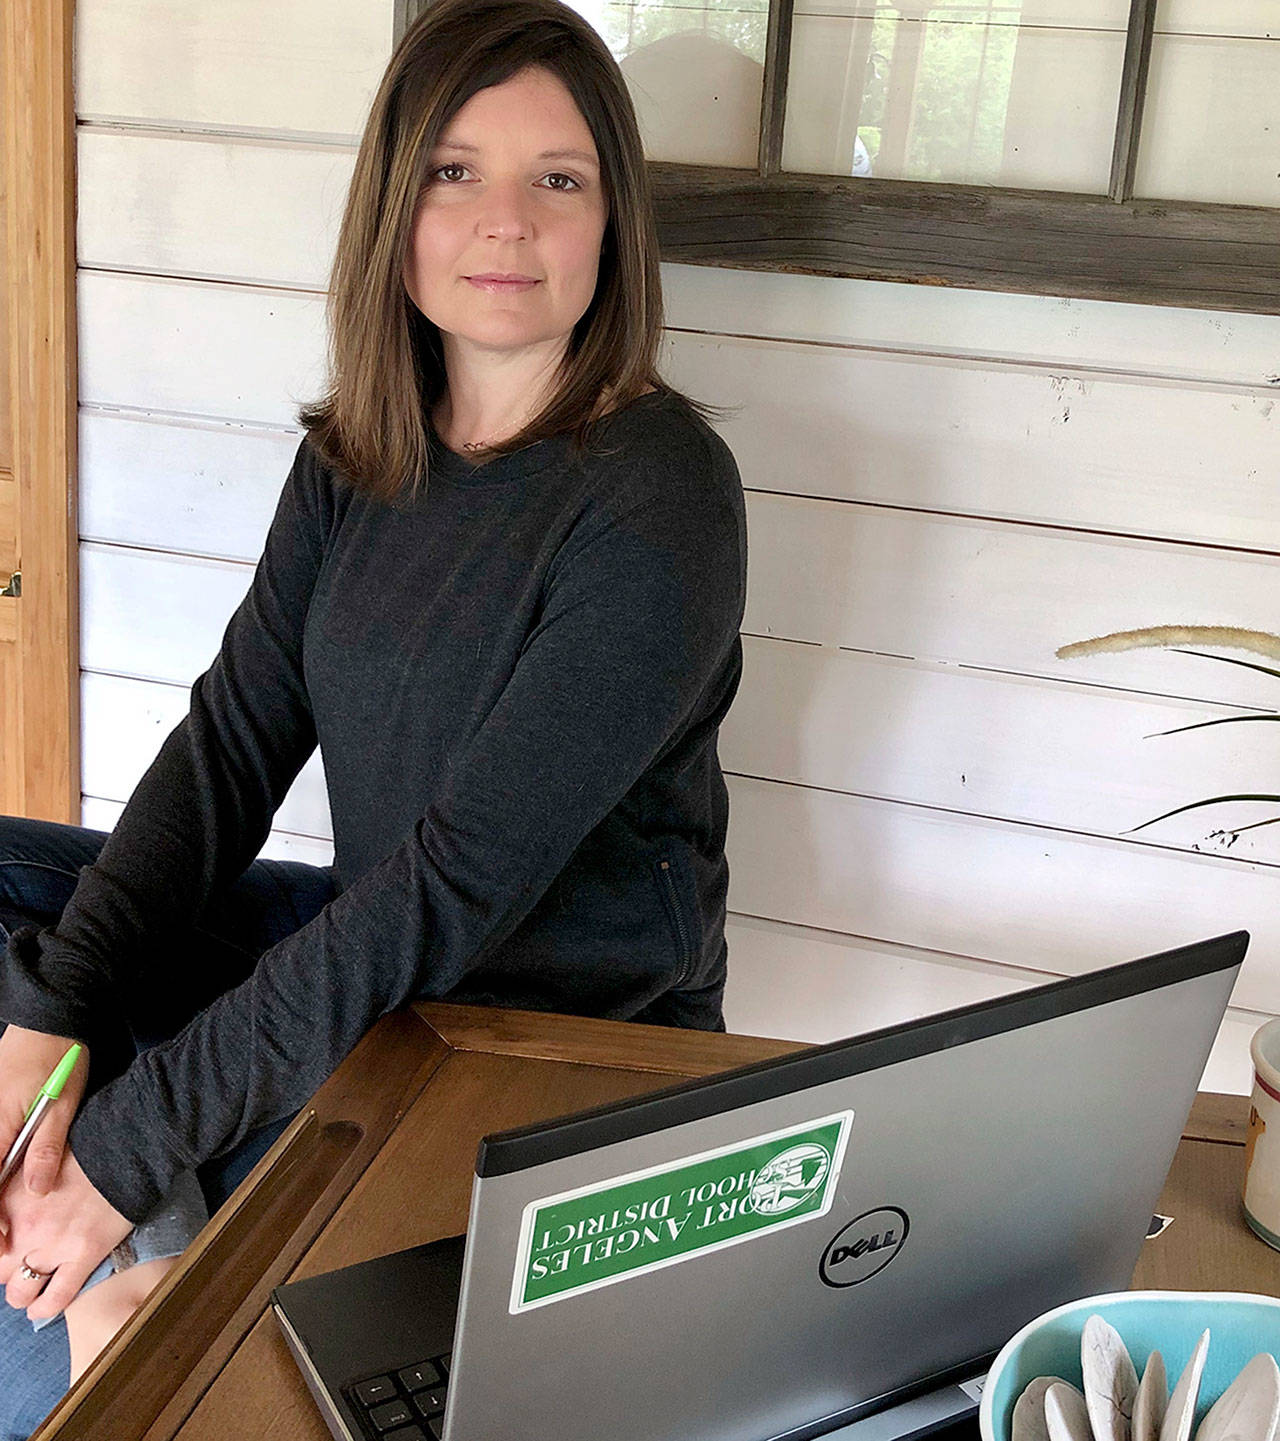 Mary Krzysiak, a second-grade teacher at Dry Creek Elementary in the Port Angeles School District, has converted her home into a virtual classroom.